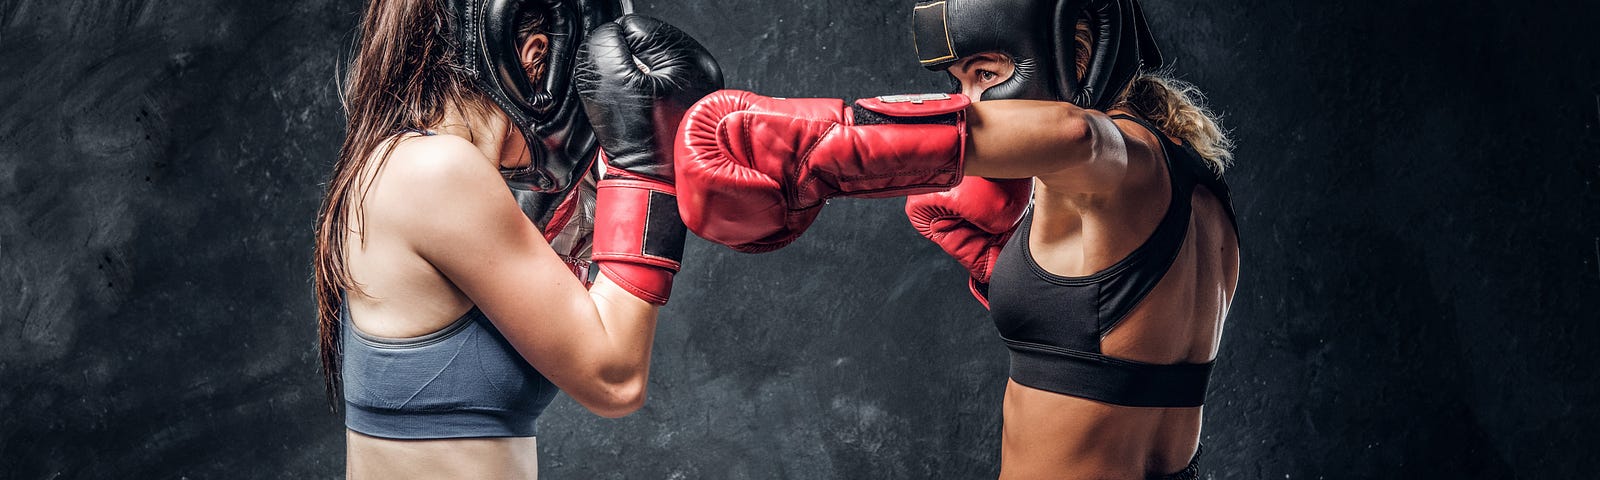 This shows two women boxing.